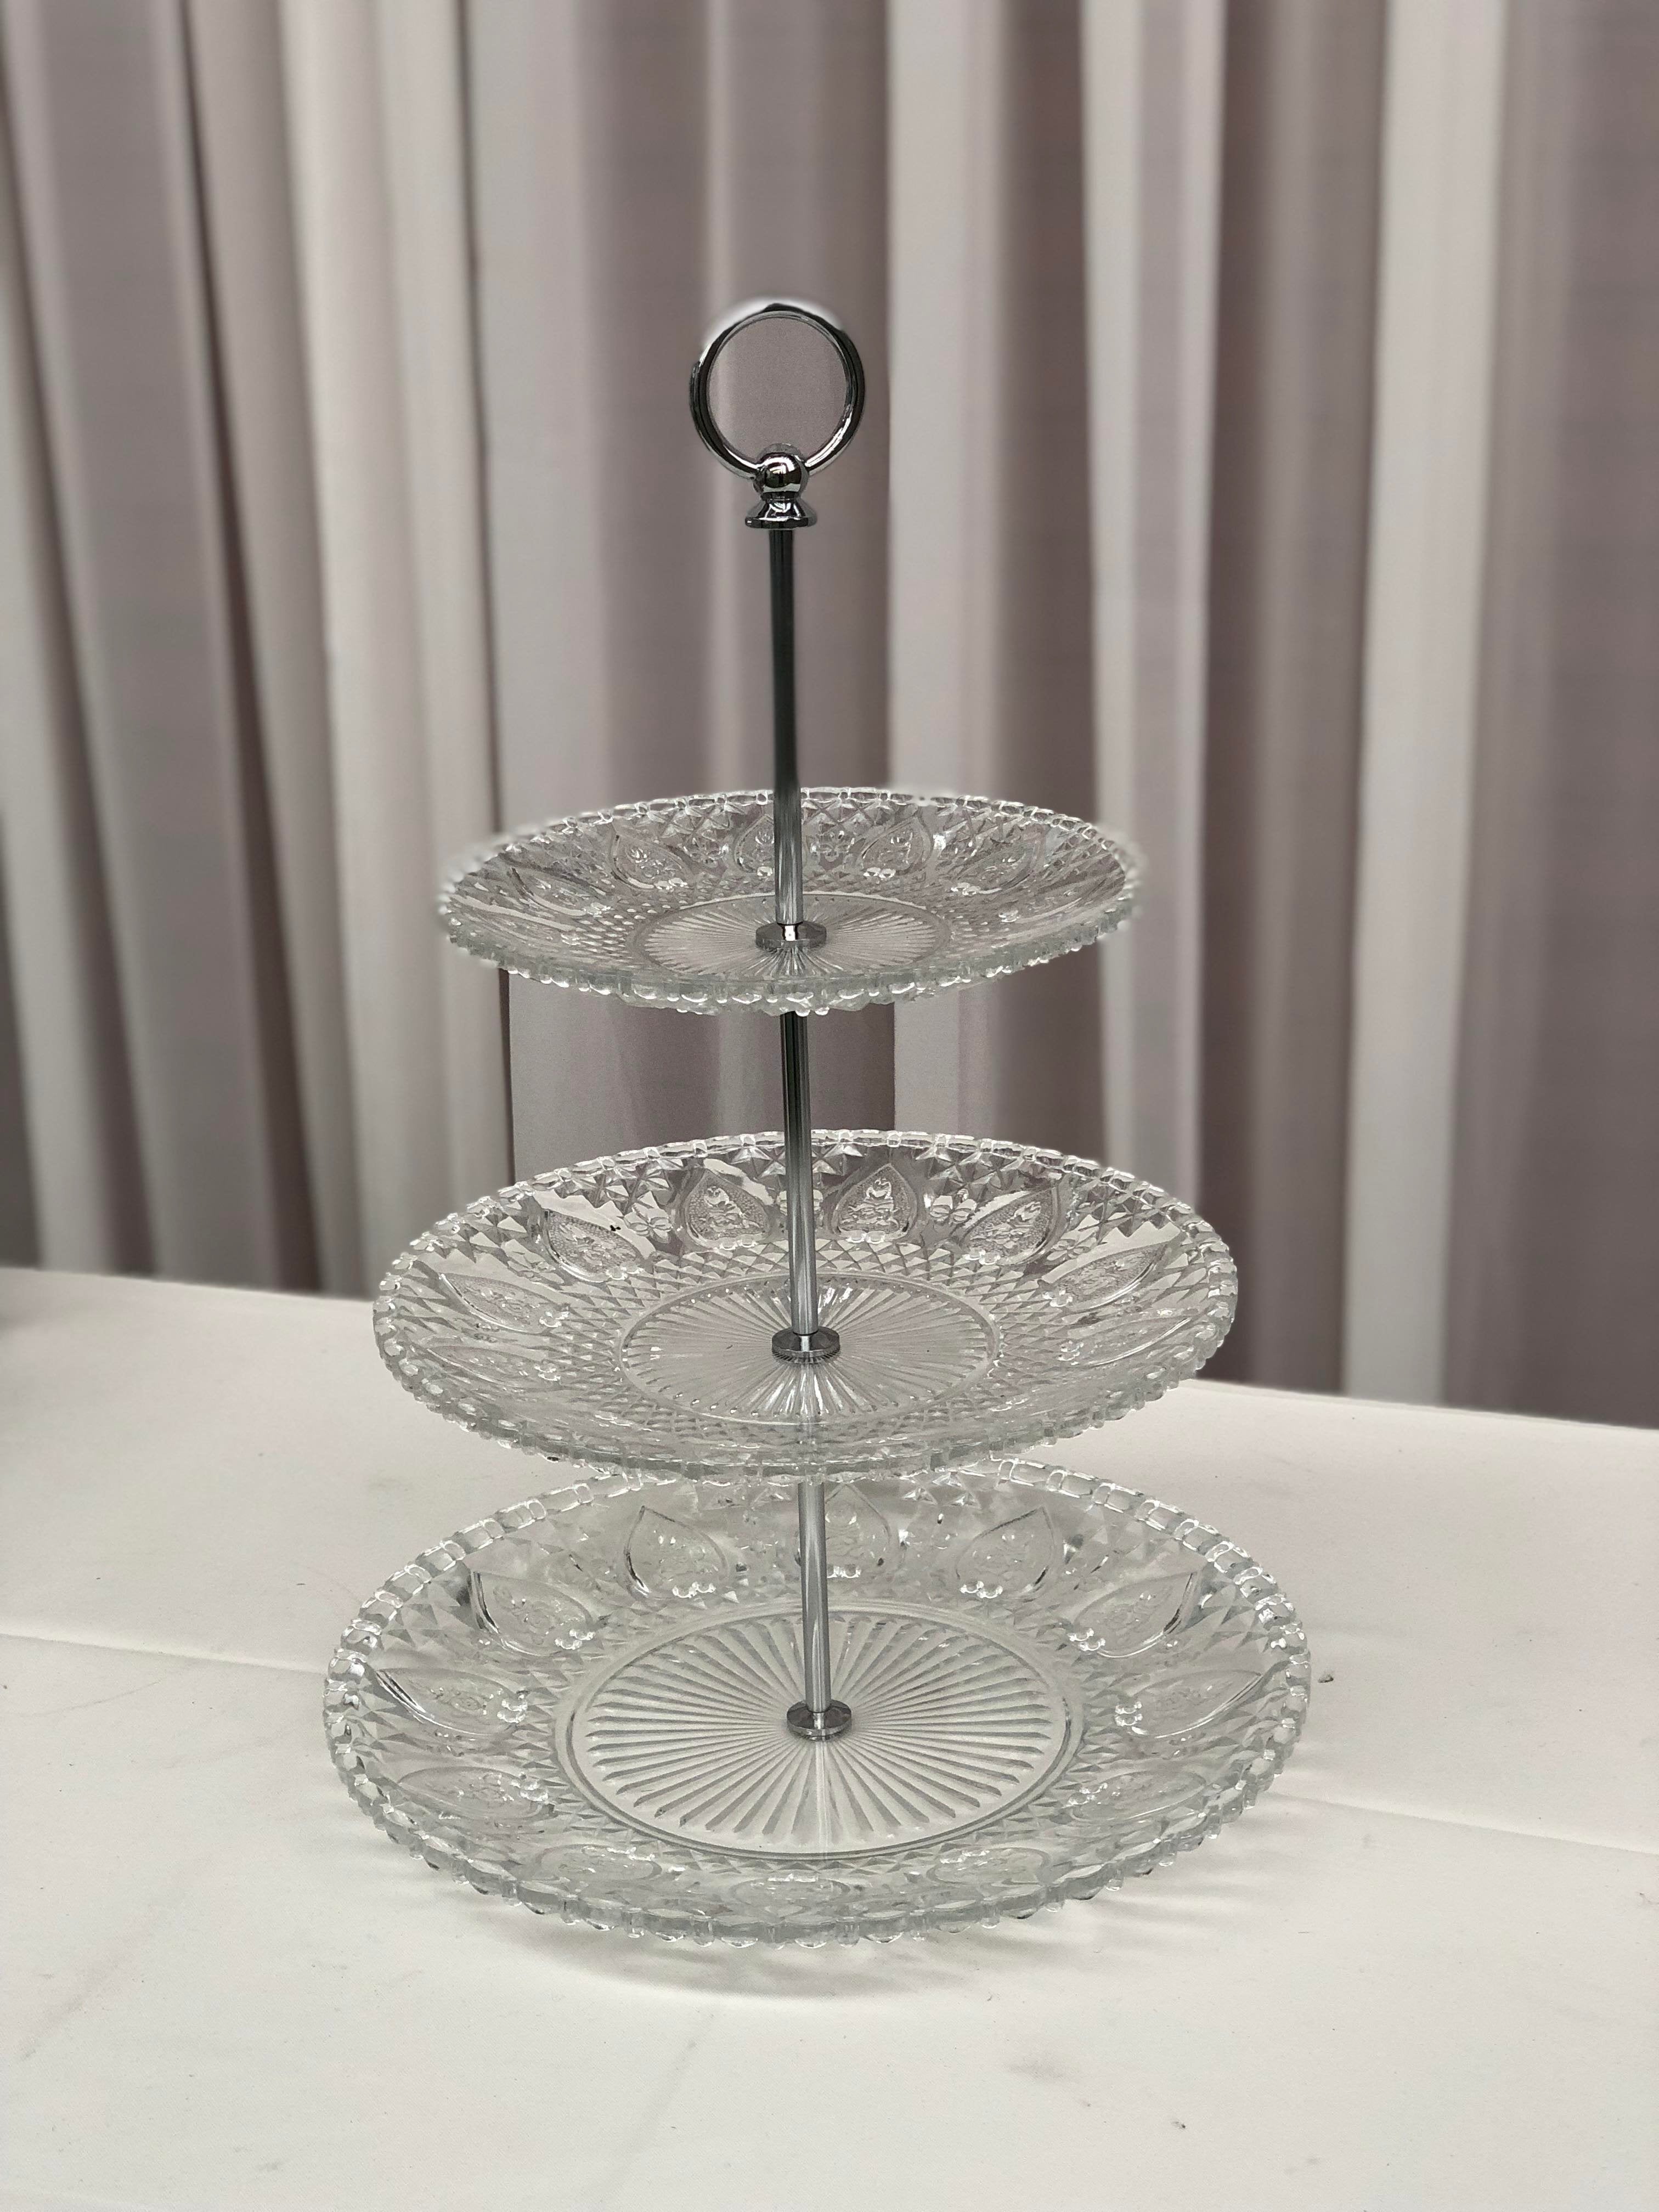 Vintage Pedestal Glass Cake Stand With Dome and Trifle Bowl - Etsy Denmark